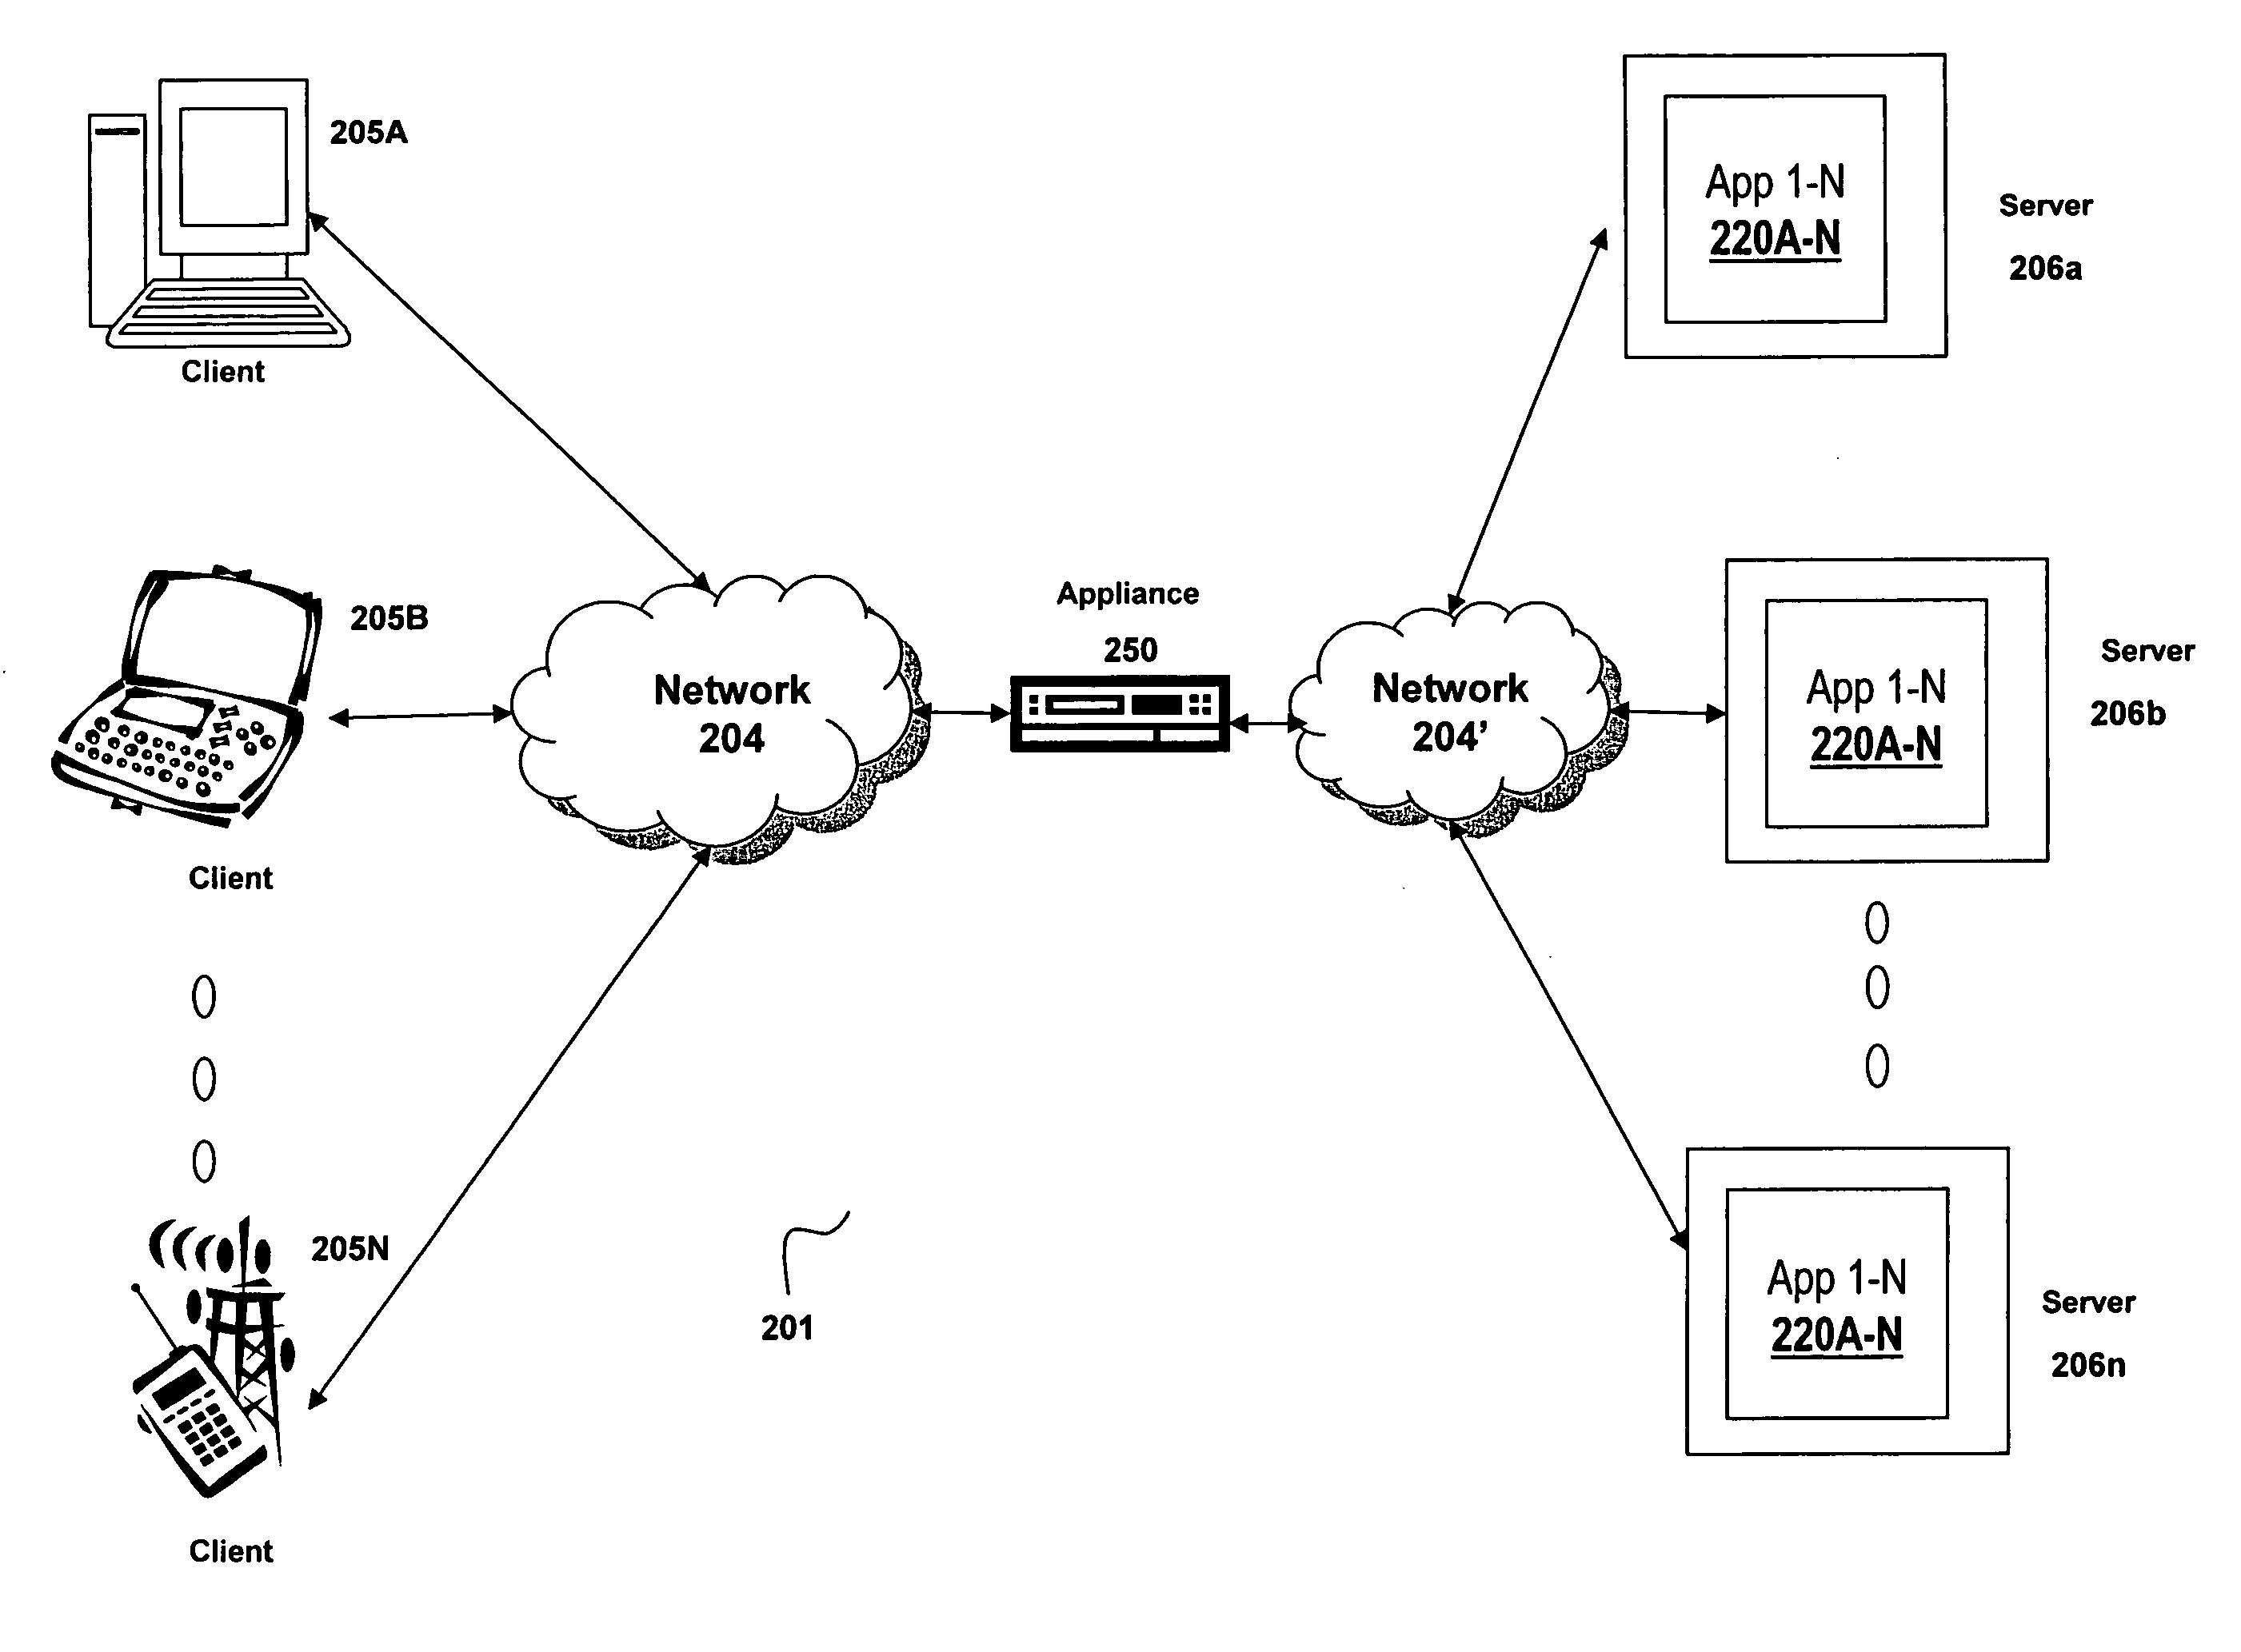 Systems and methods for providing client-side accelerated access to remote applications via TCP multiplexing